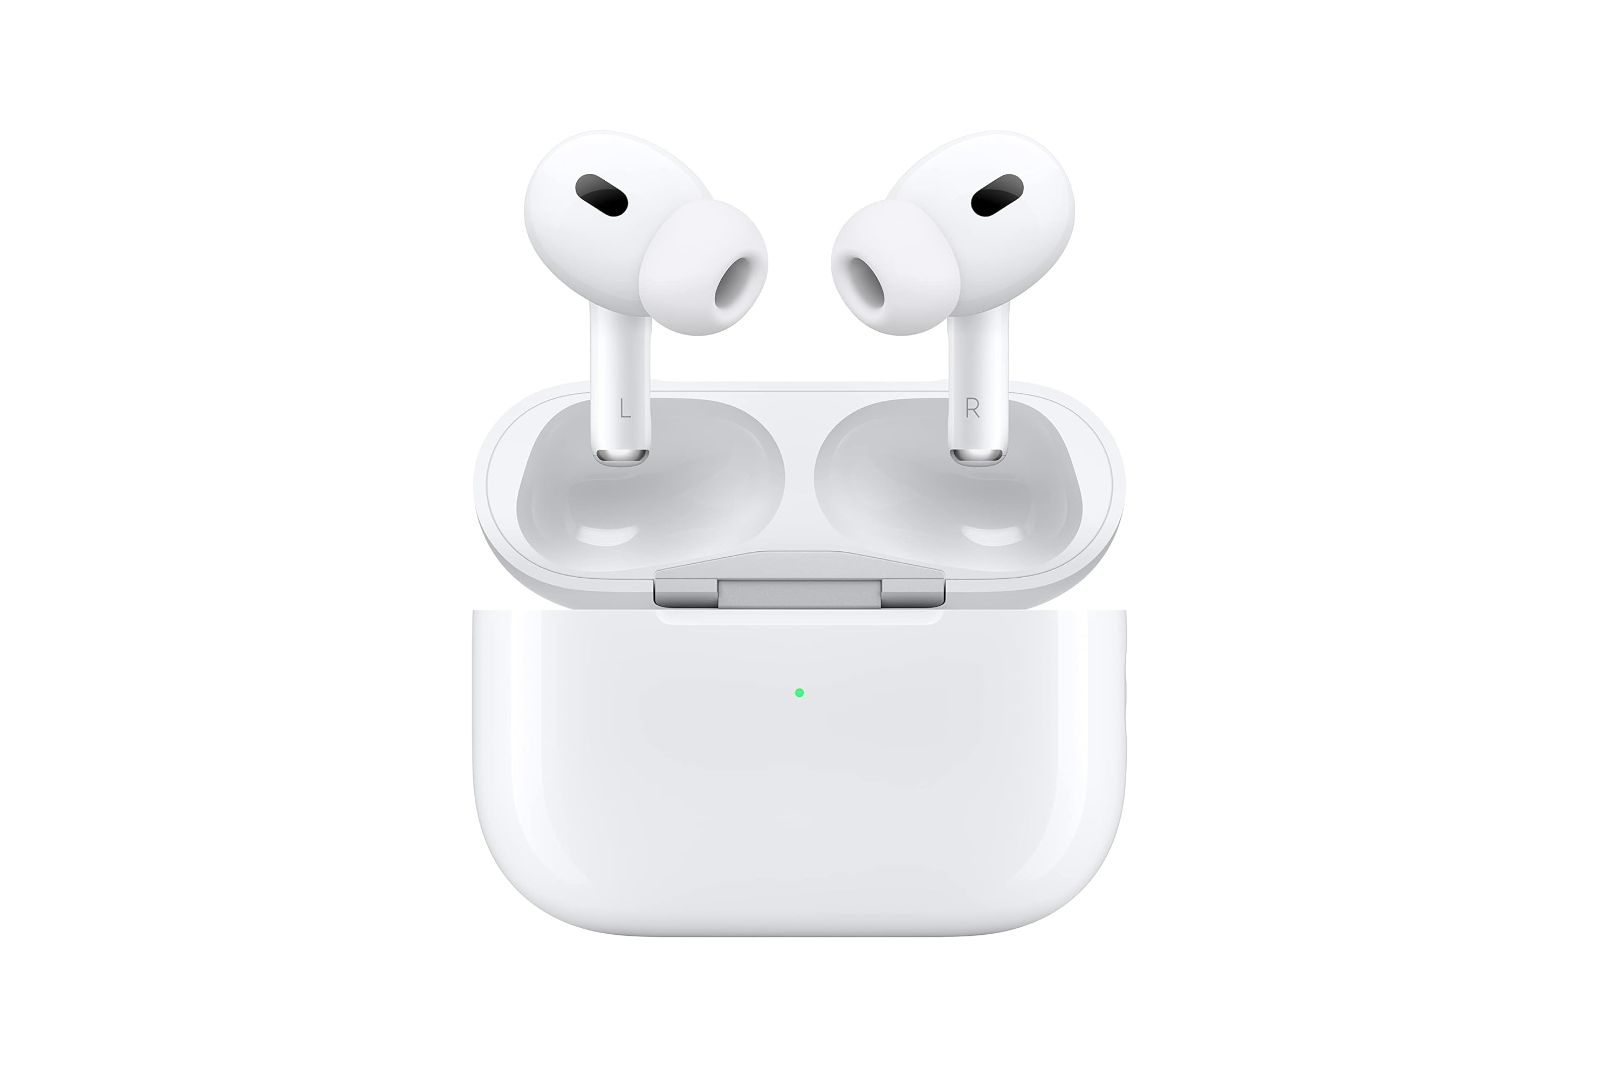 A AirPods Pro case on a white background with two AirPods floating above it.